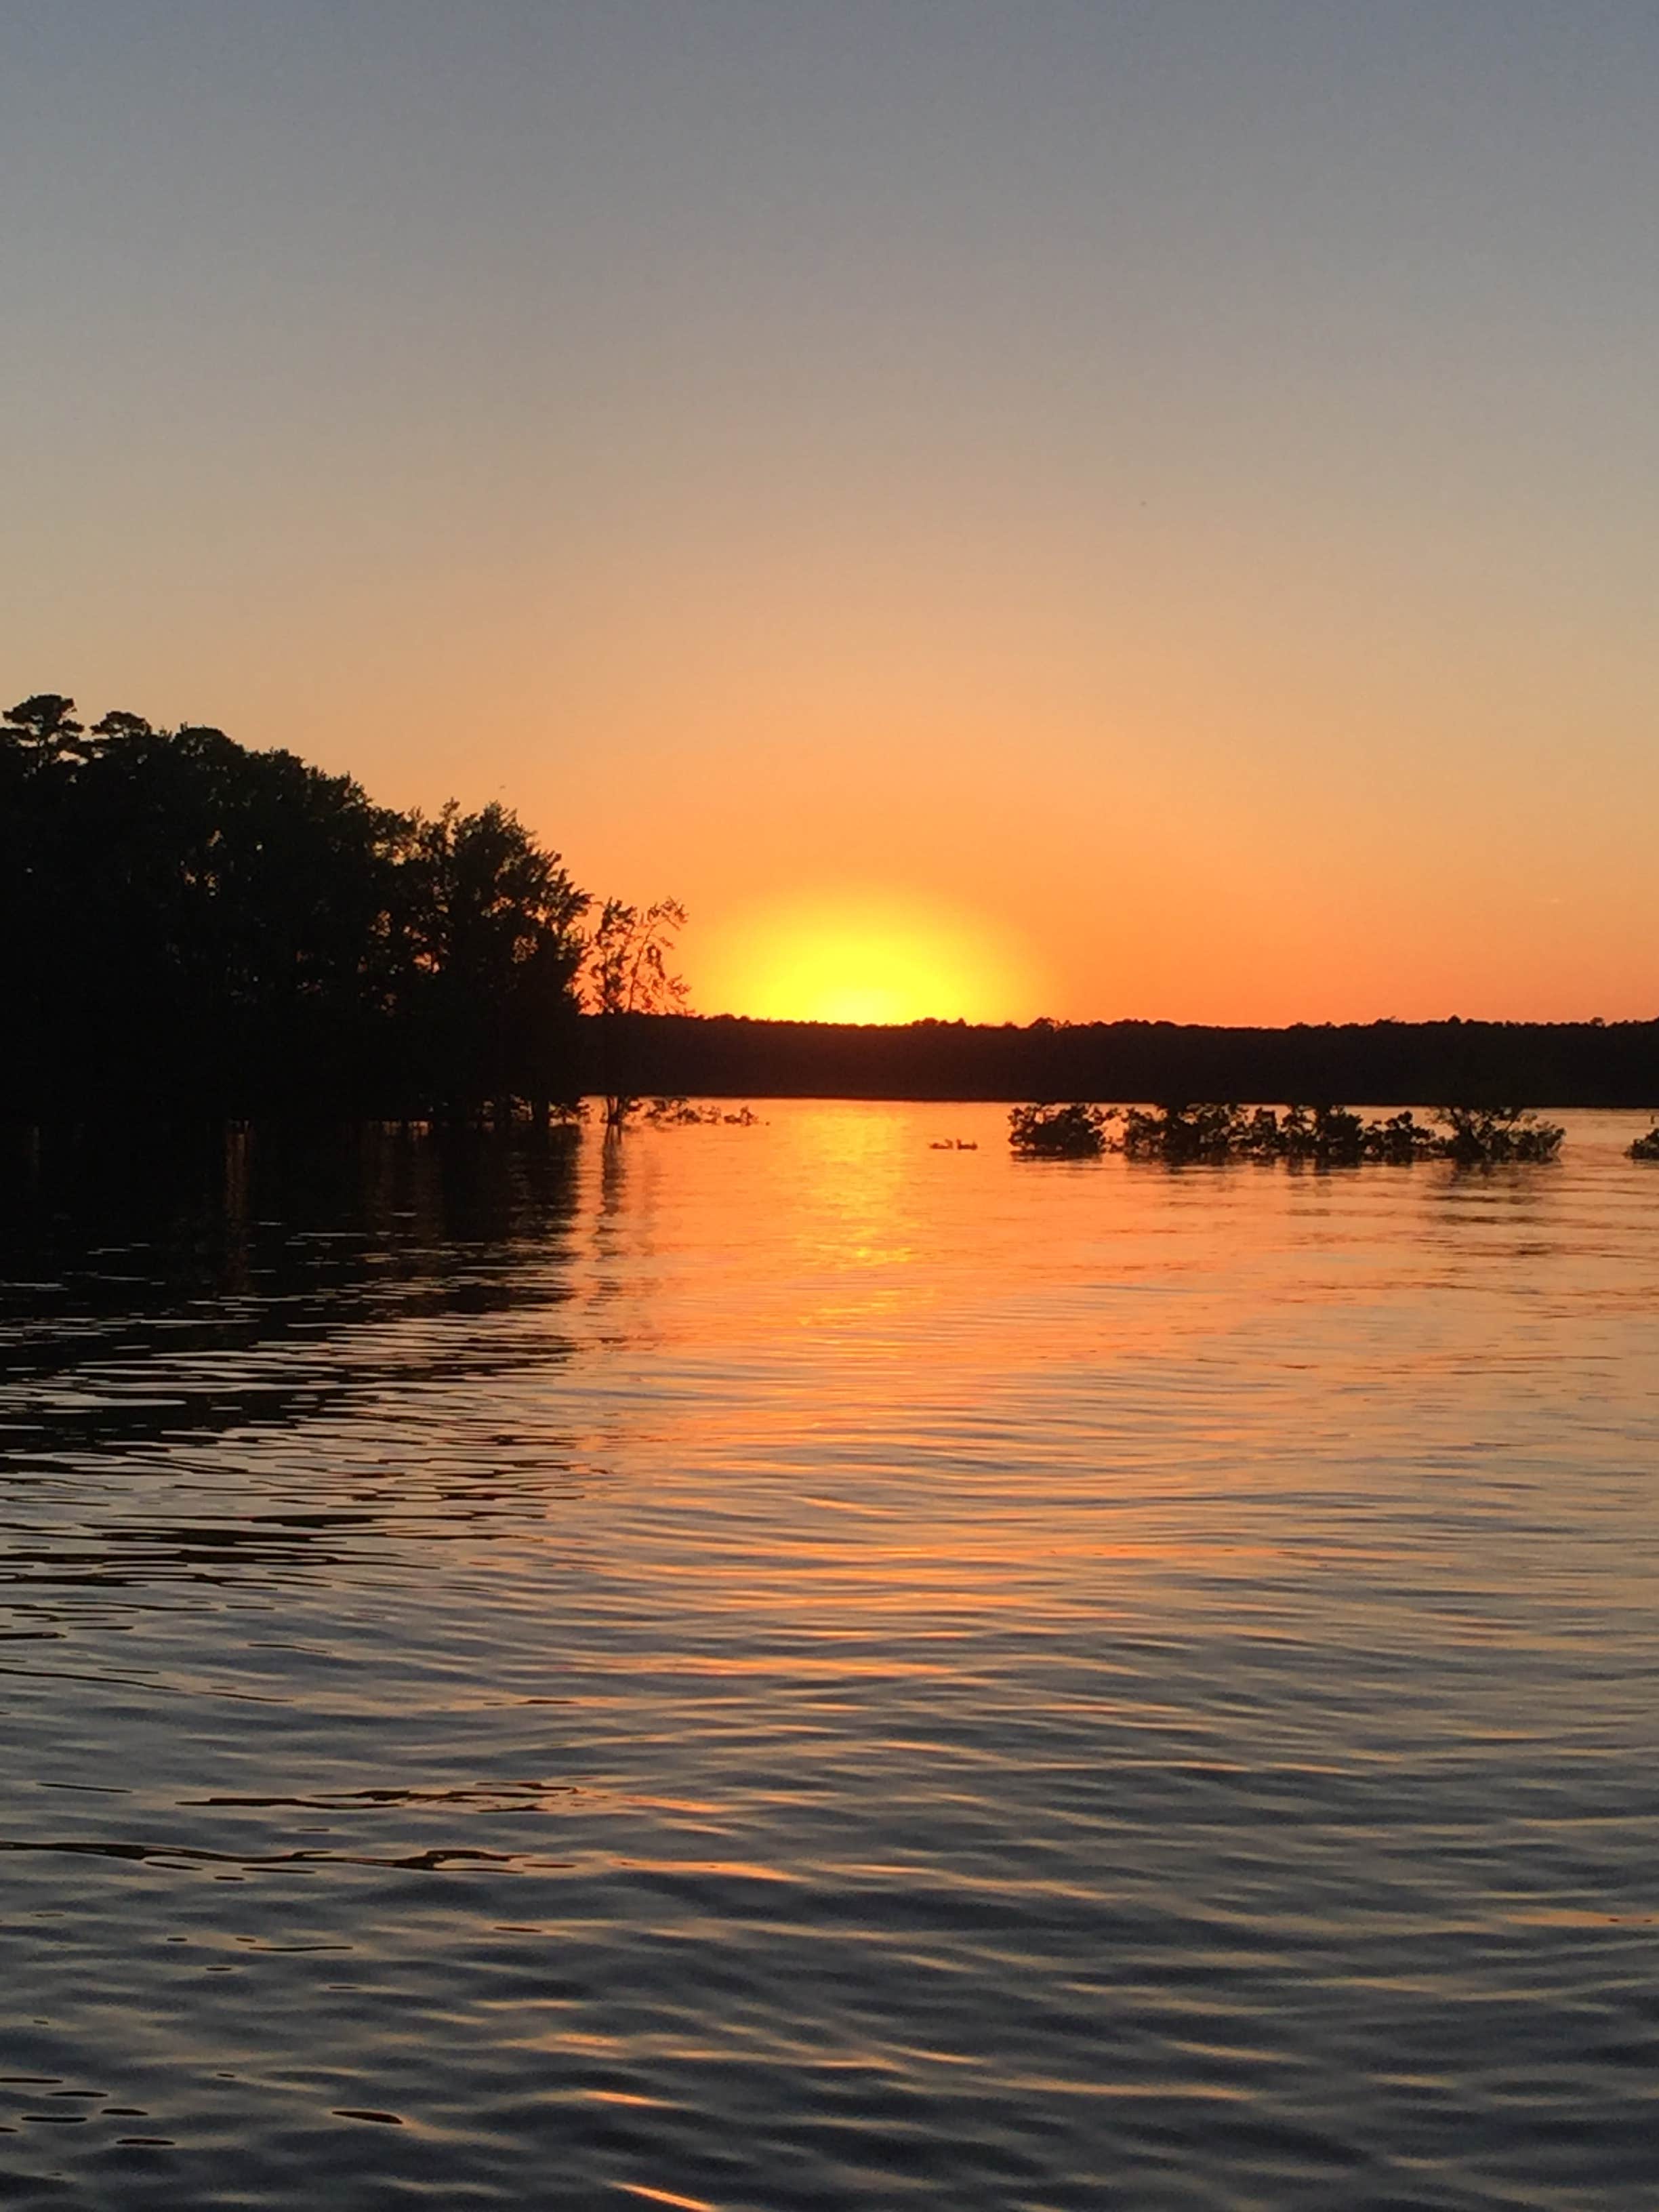 Camper submitted image from Tompkins Bend - Lake Ouachita - 4